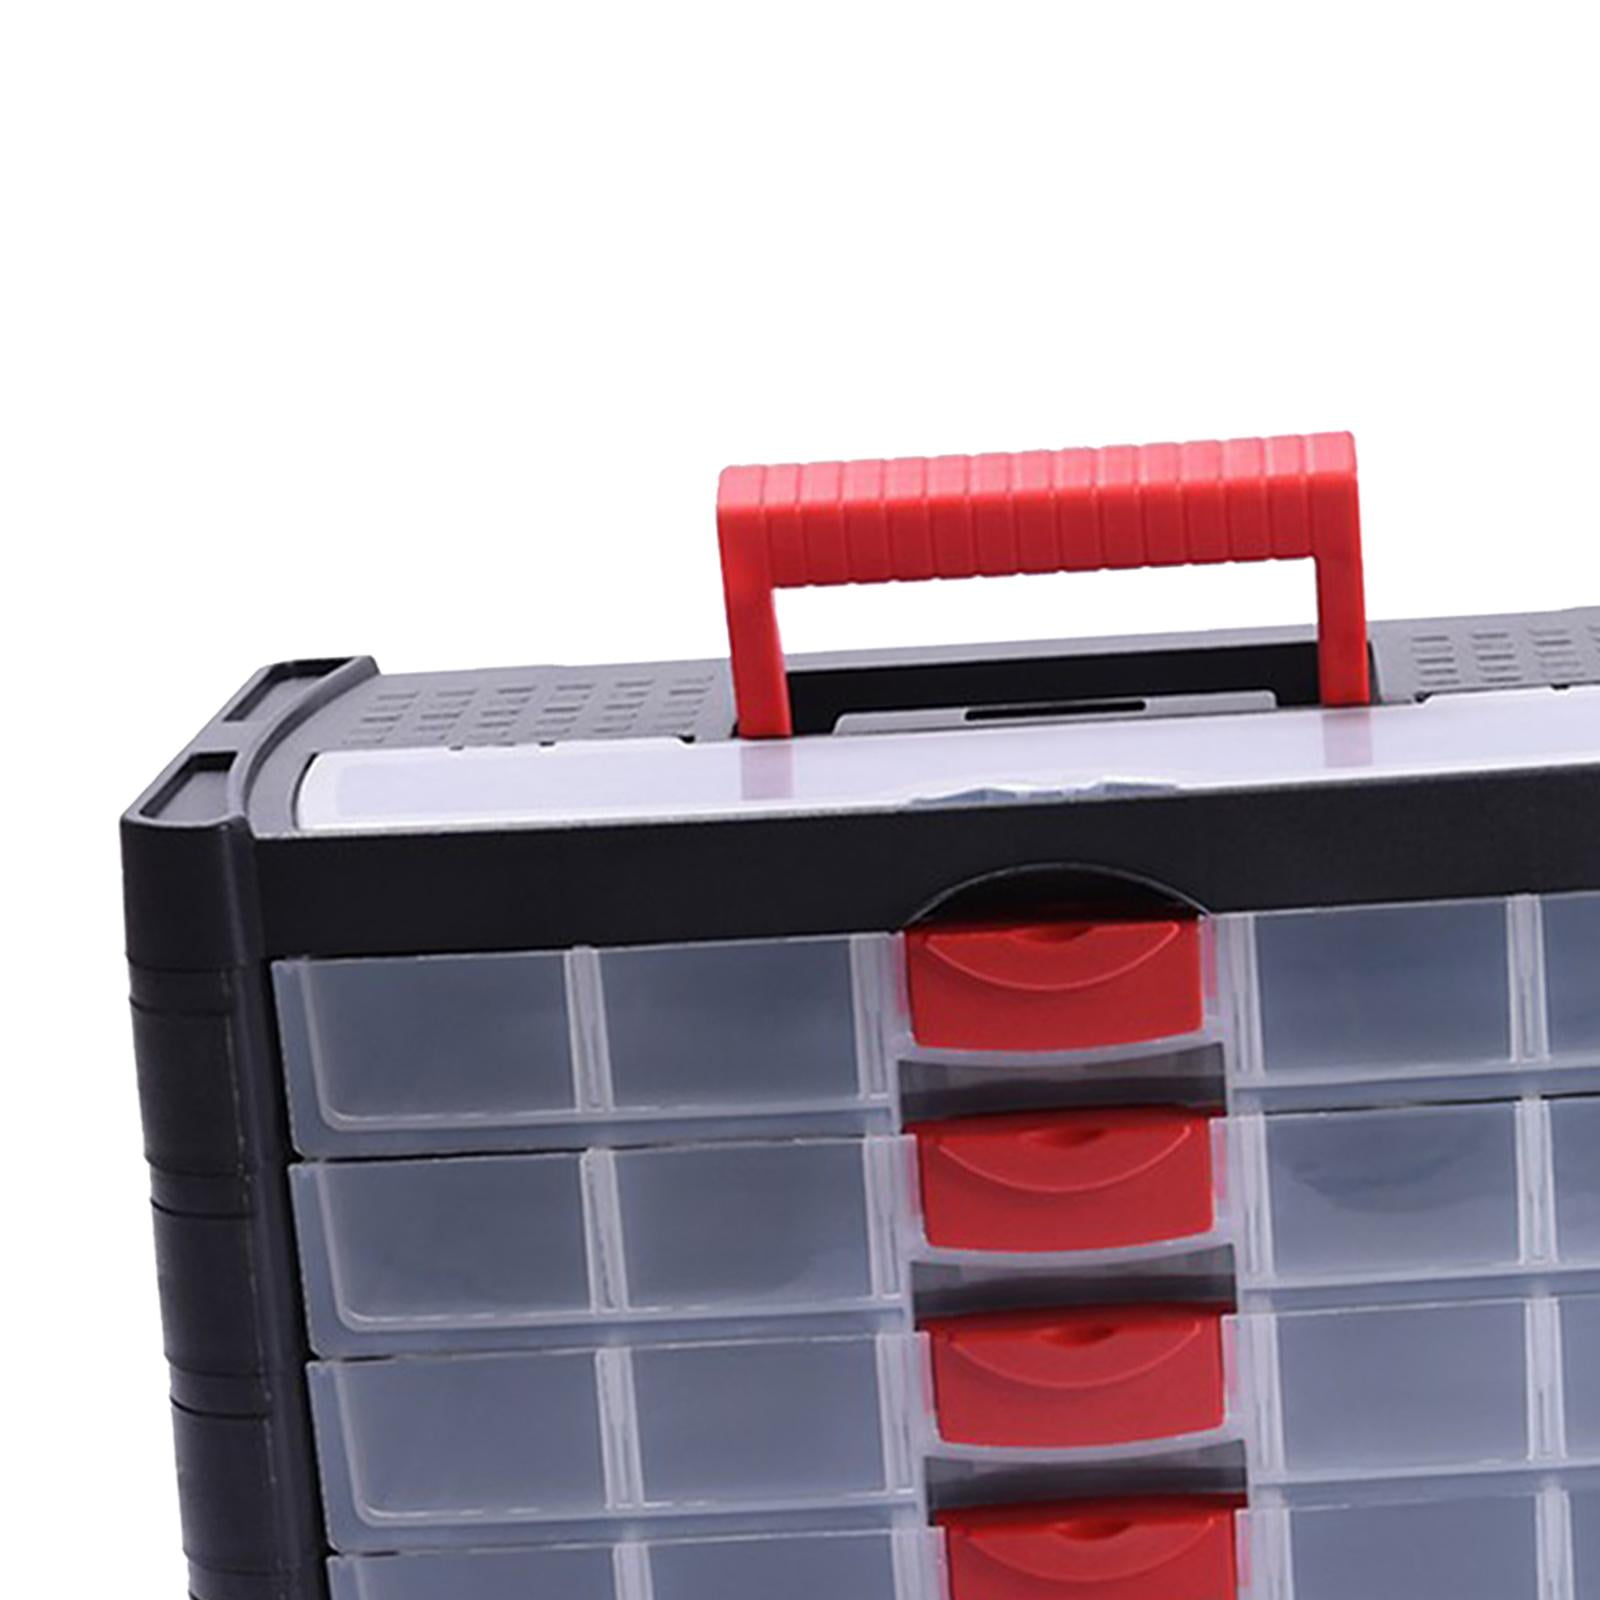 Gator Clamps Toolbox Organizer - Tool Organizer Nail Organizers - Parts Case Storage Box - Screw Nuts and Bolt Electronic Component Storage B